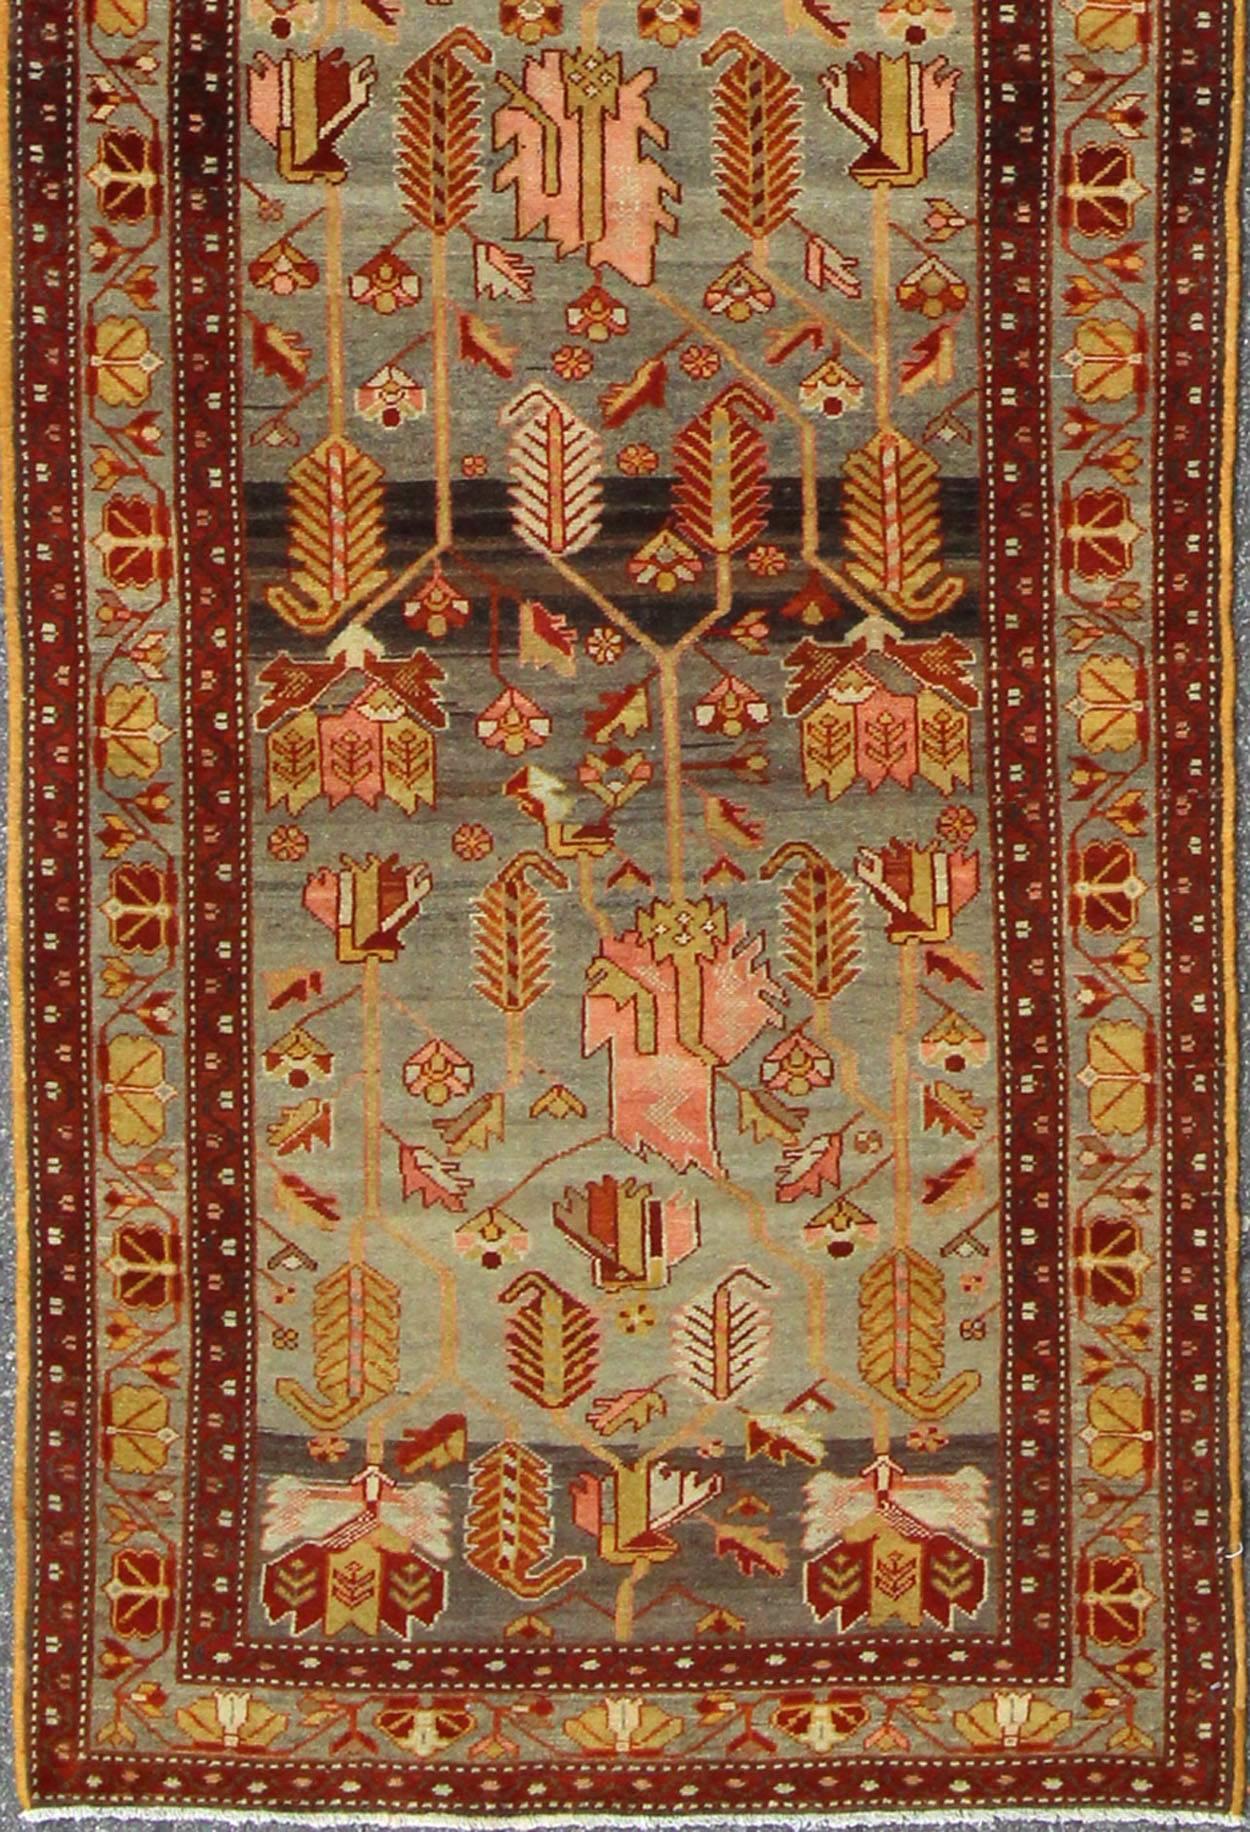 This magnificent antique Persian Malayer carpet, of an impressive pattern, bears a beautiful, all-over sub-geometric design paired with a delightful palette of dark reds, various blues, pinks, yellow-green, brown and a very light green. The central